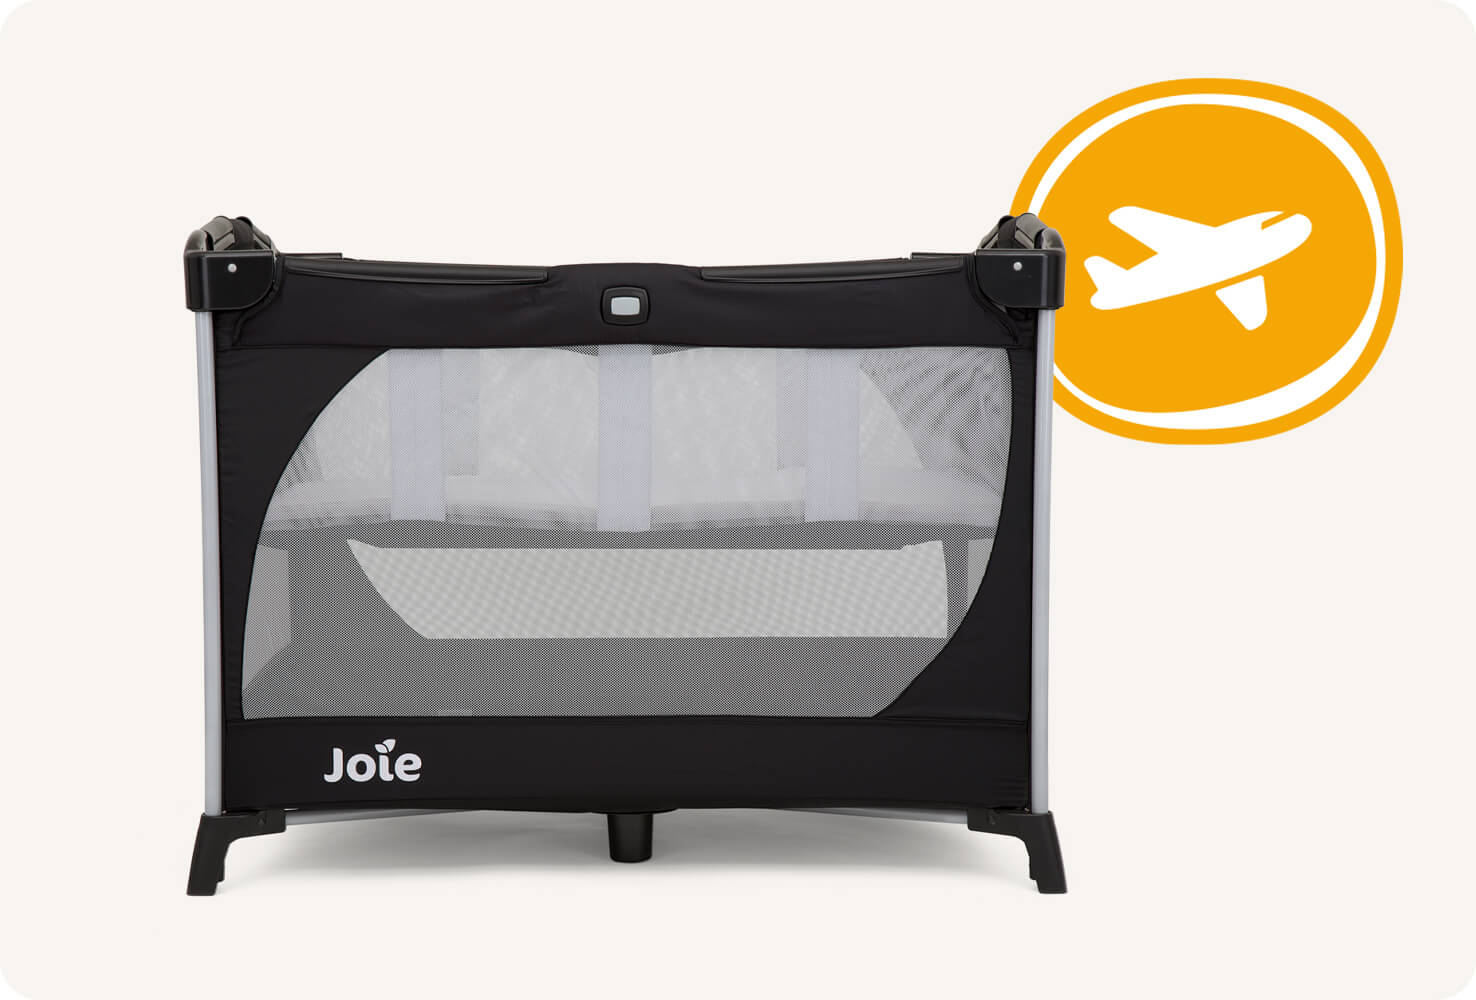 Black Joie Allura travel cot with bassinet facing straight on with an orange circle enclosing a white airplane icon.